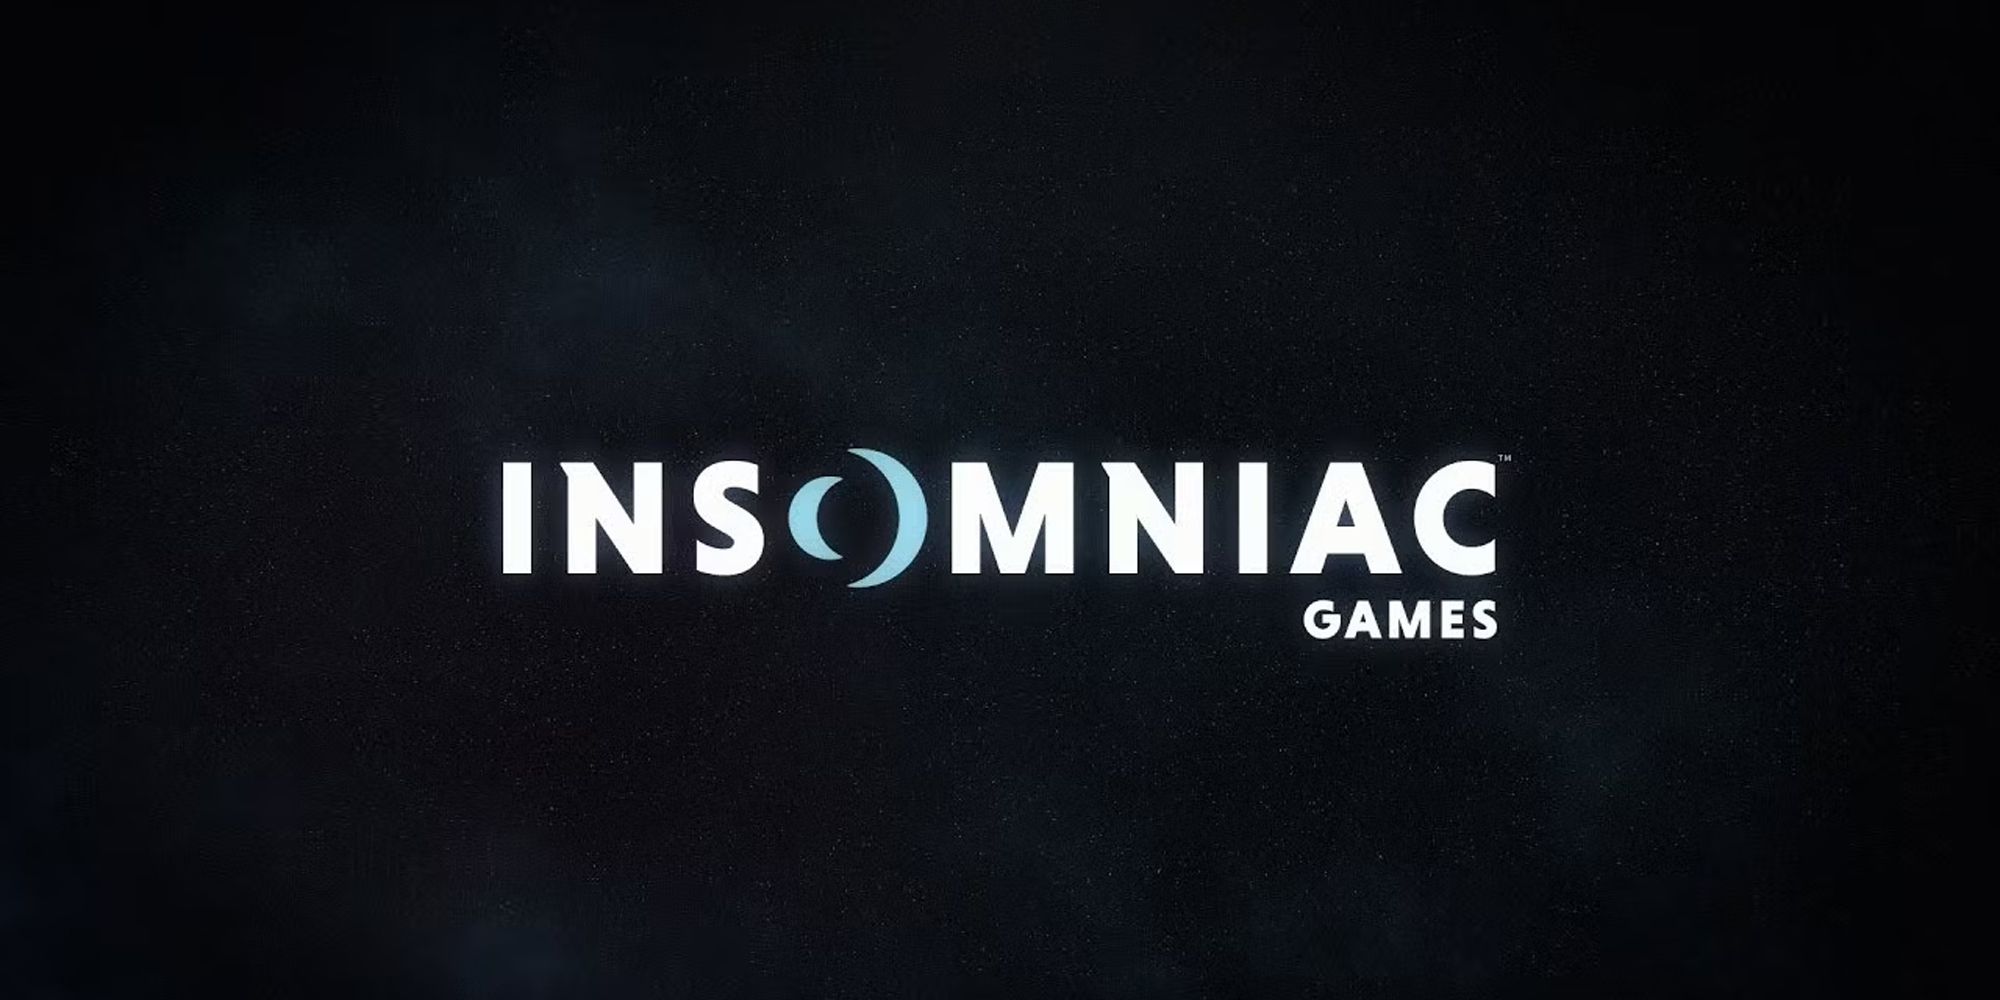 Insomniac Games logo over a space background